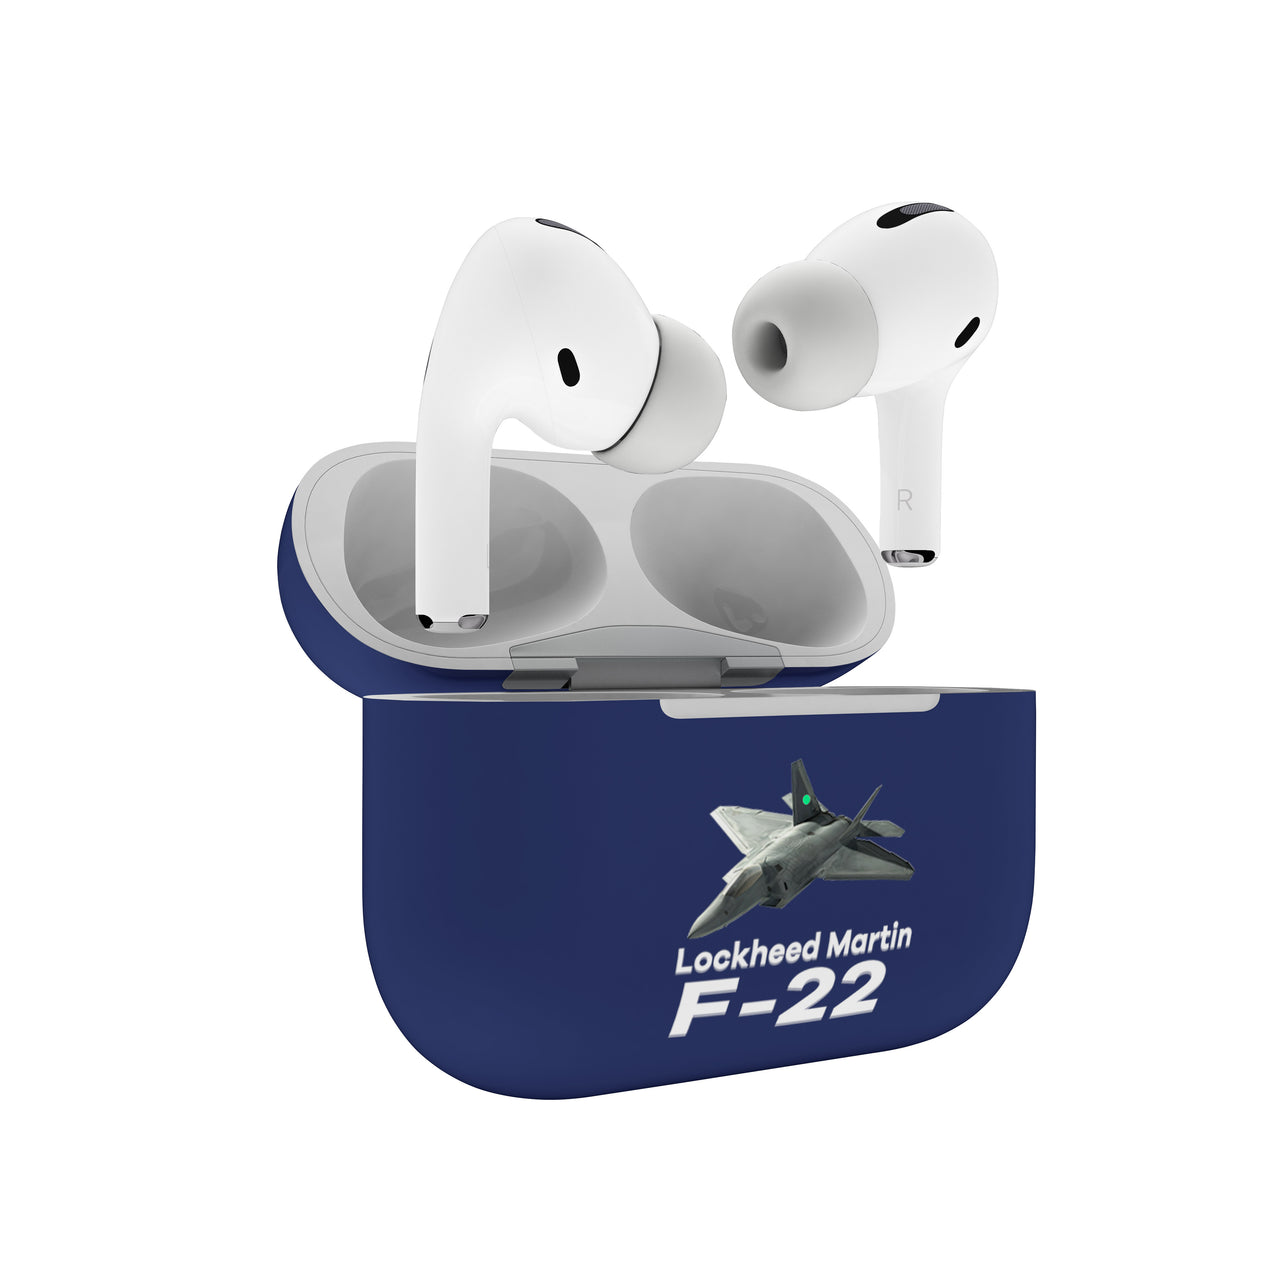 The Lockheed Martin F22 Designed AirPods  Cases